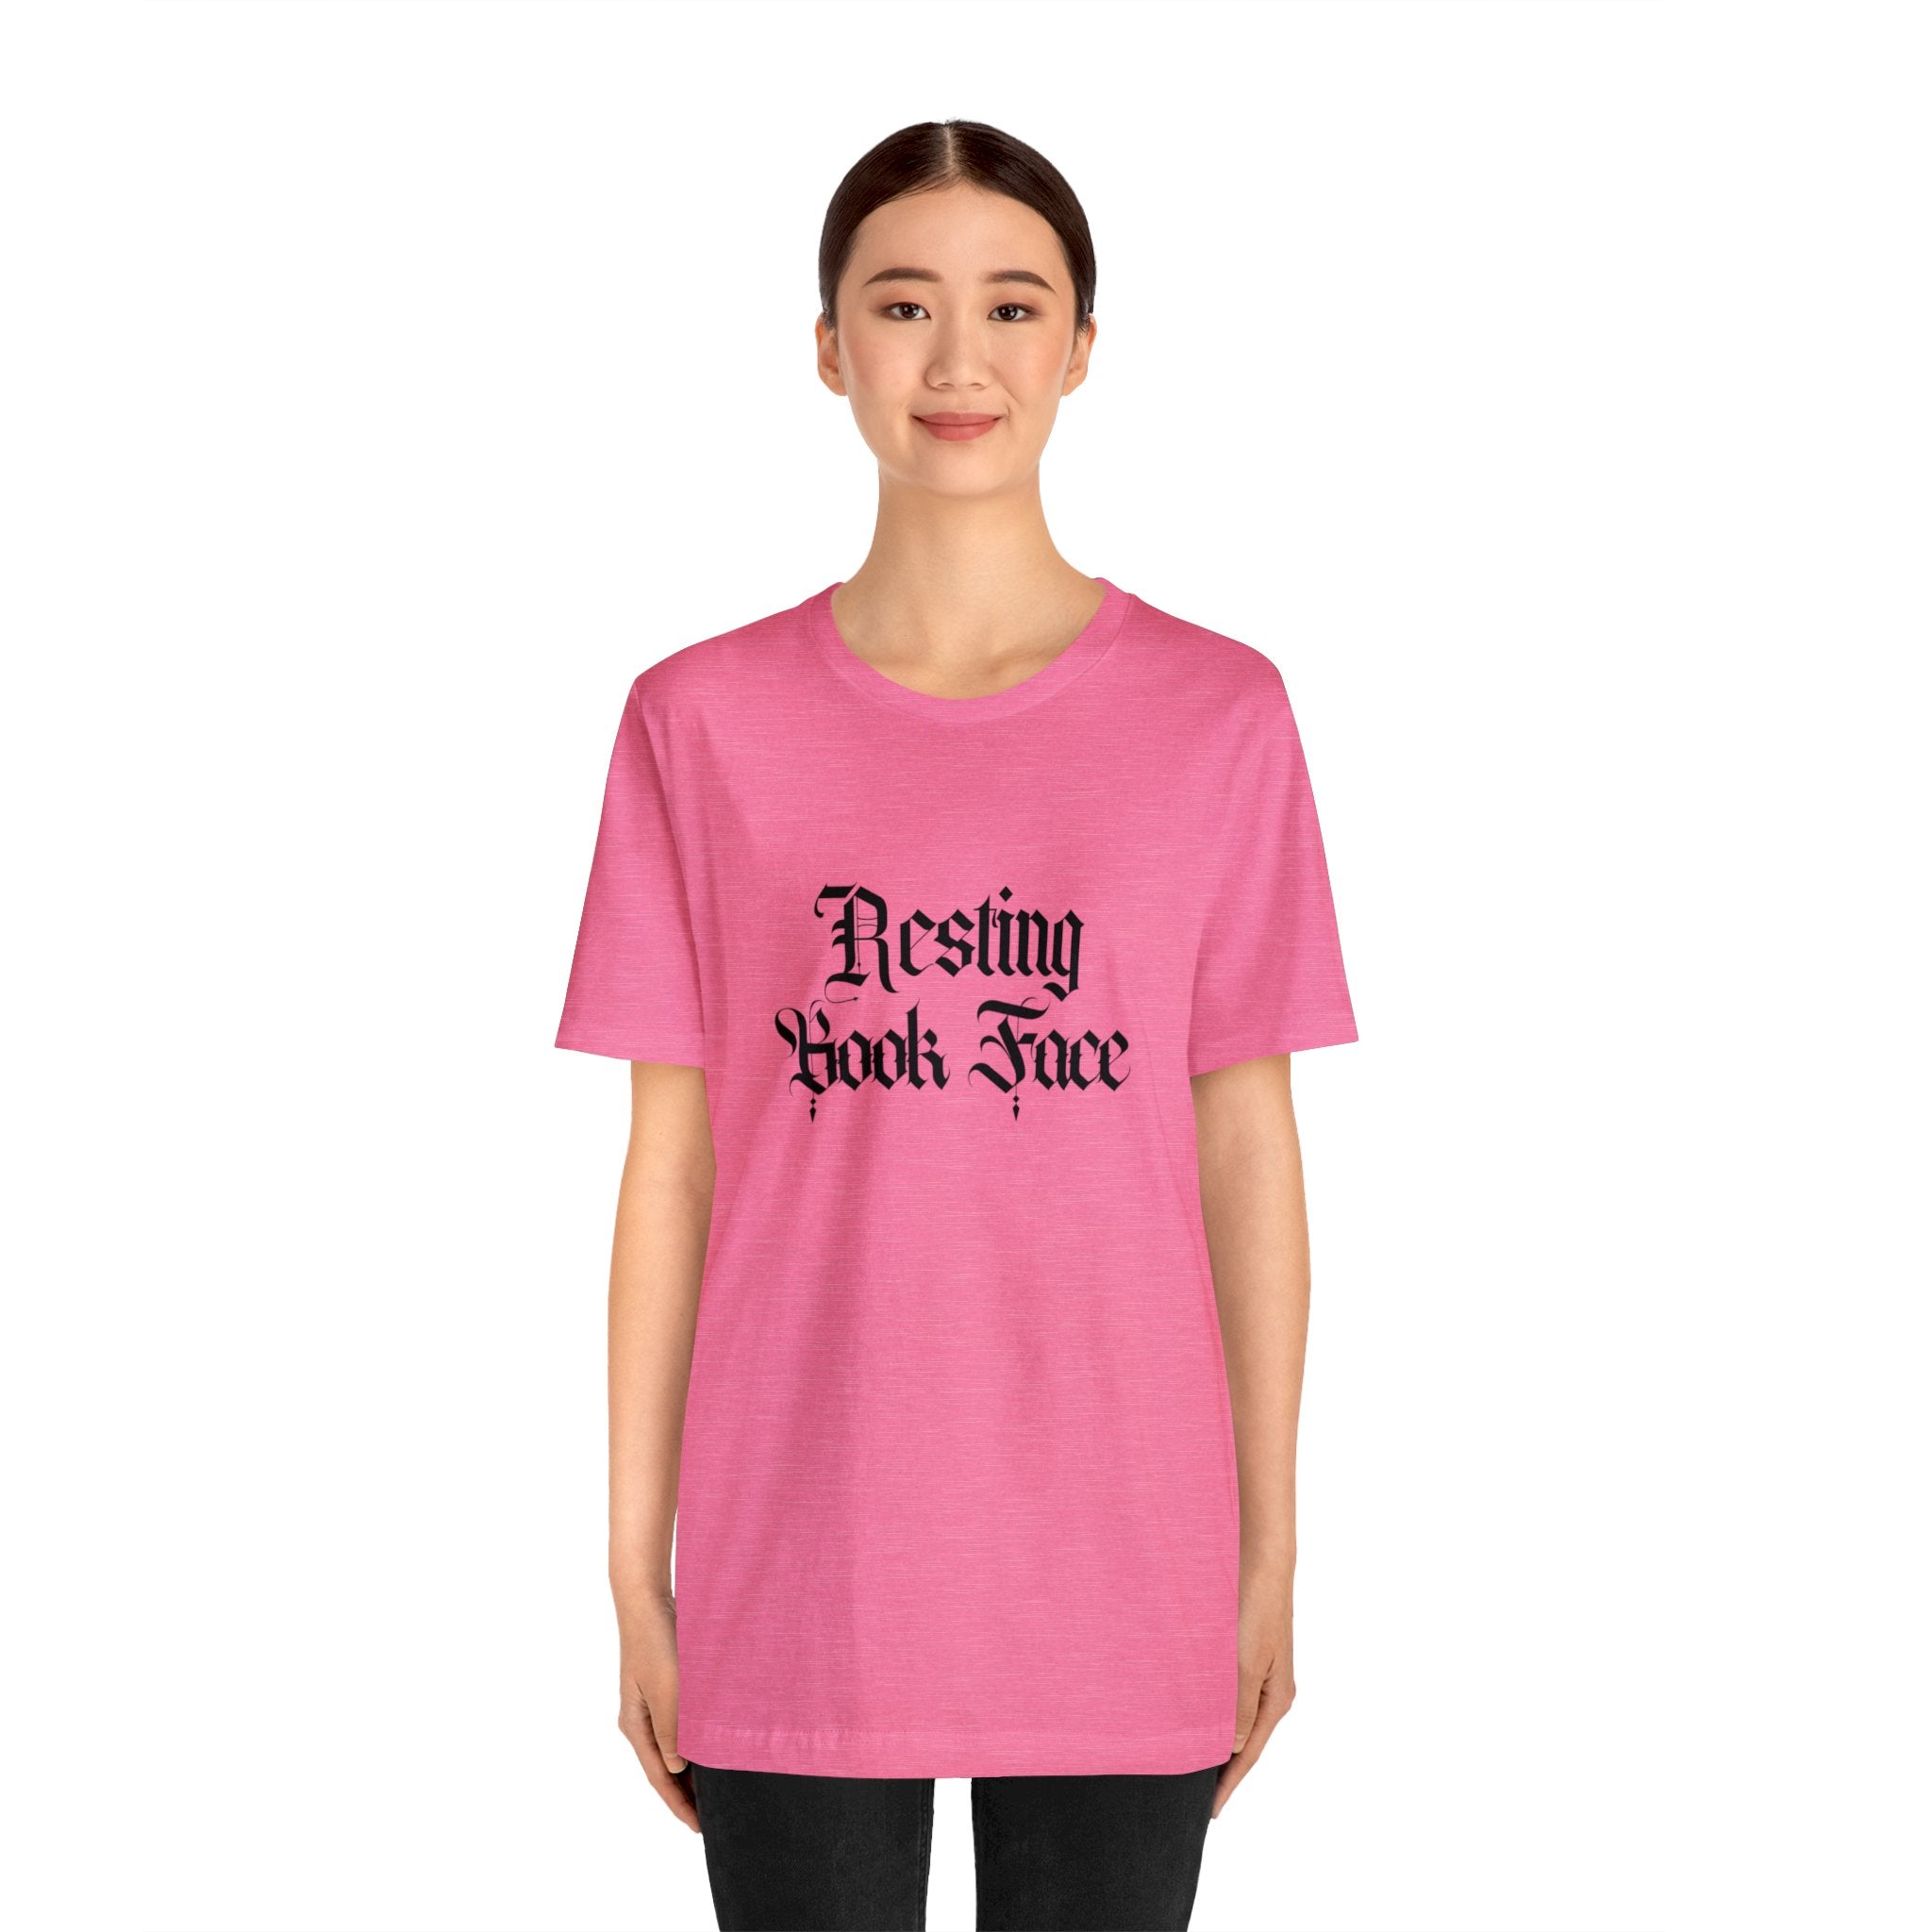 Resting Book Face Tee